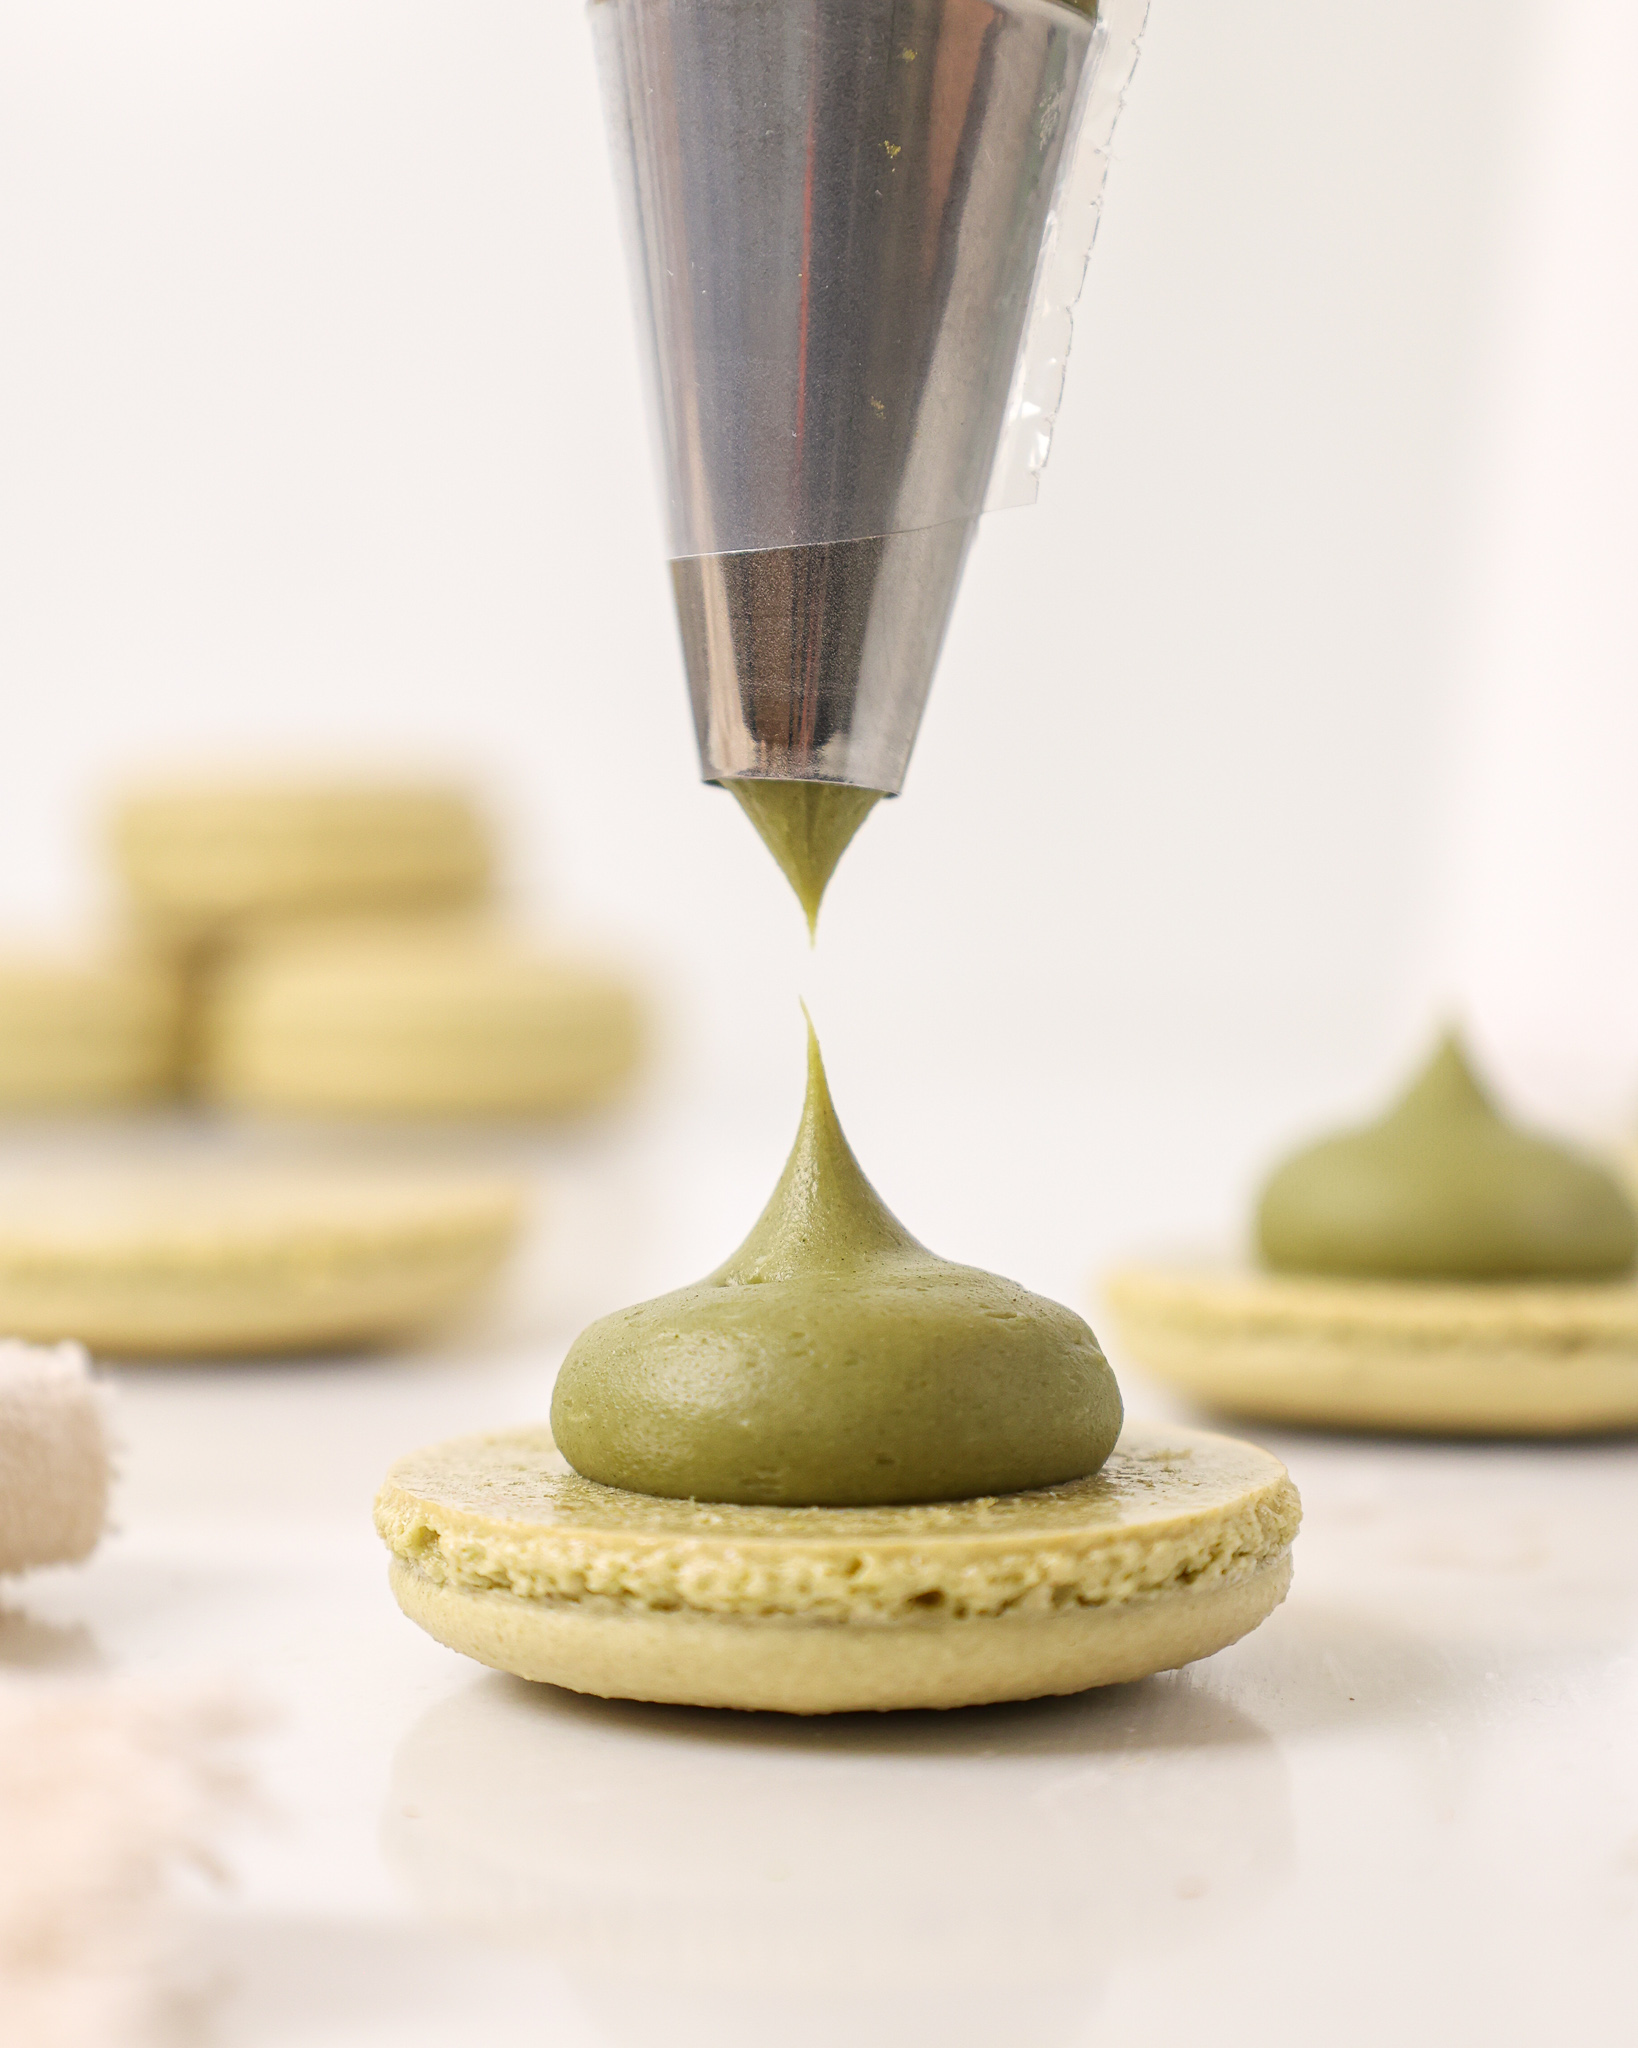 image of matcha ganache being piped on to a matcha macaron shells